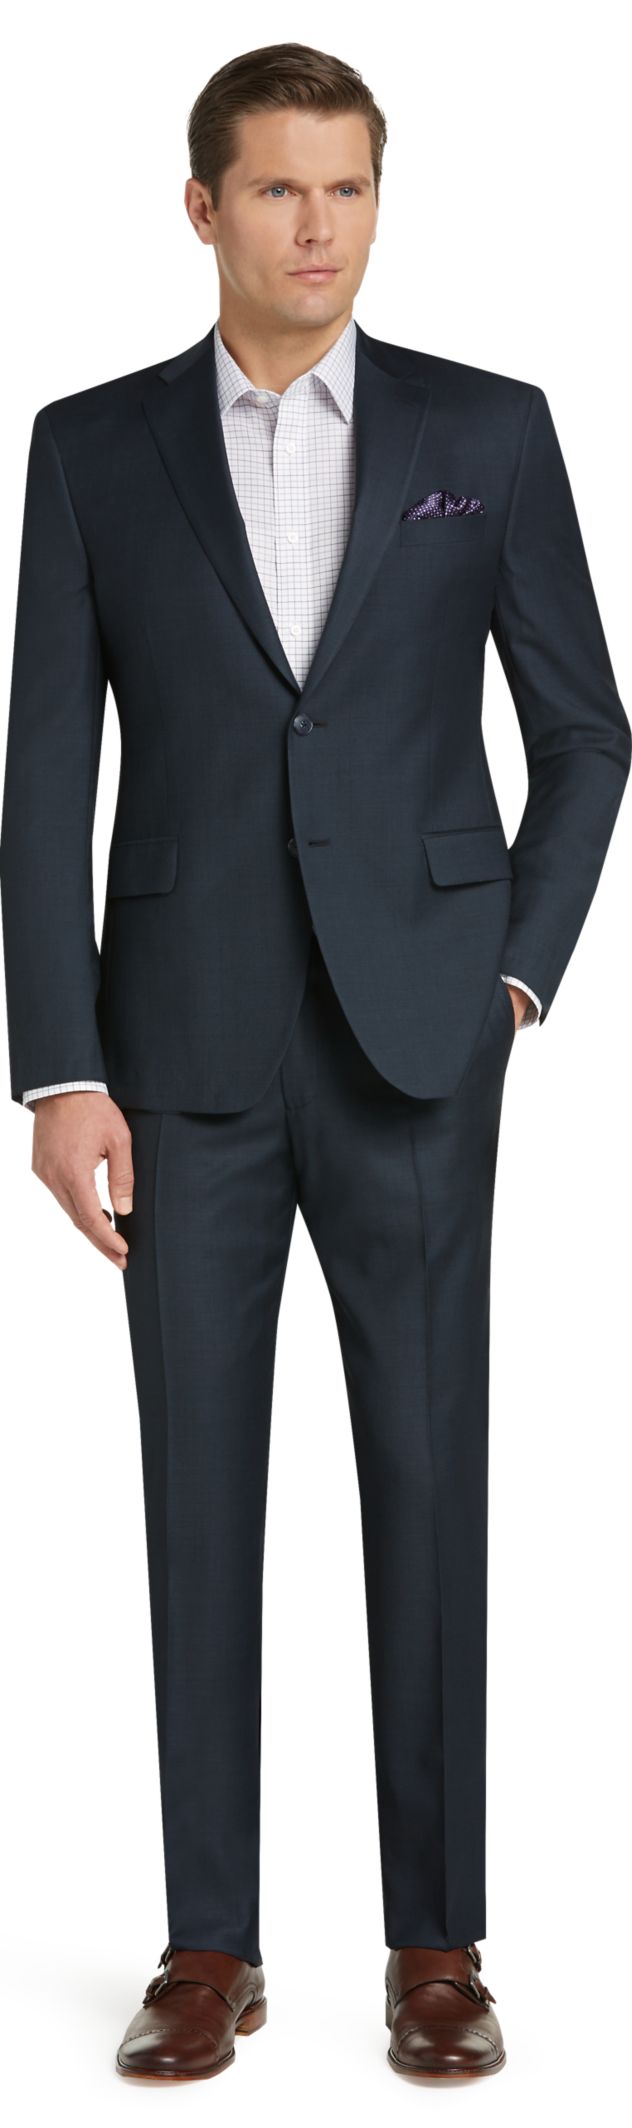 mens suits clearance